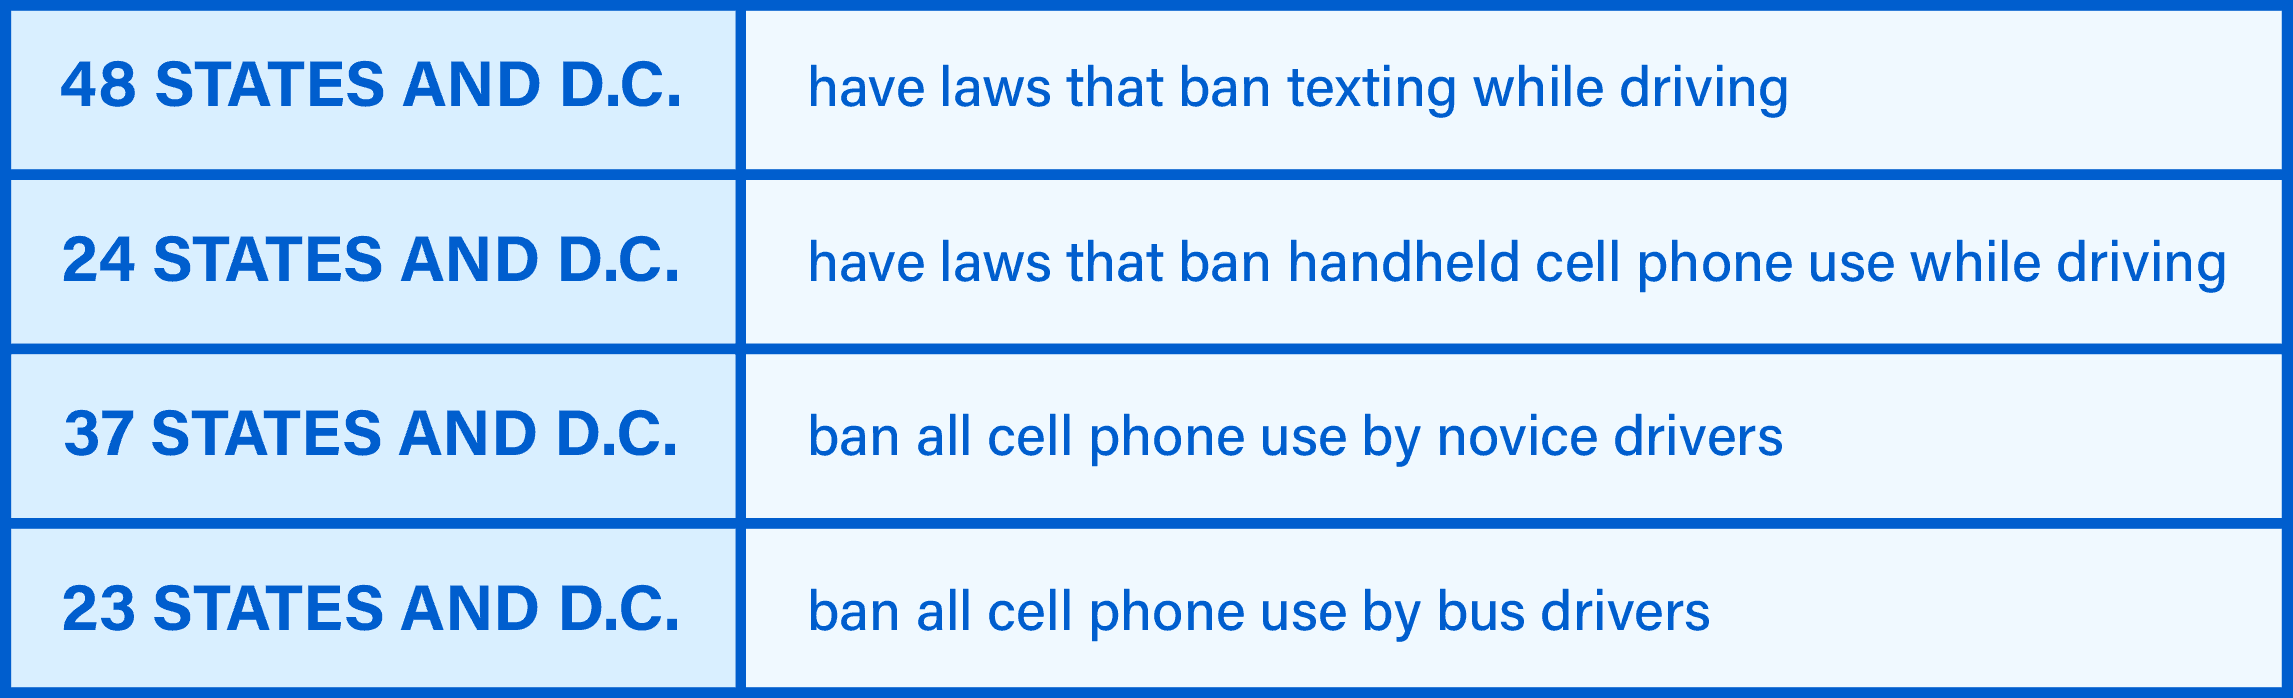 Laws Against Texting and Driving